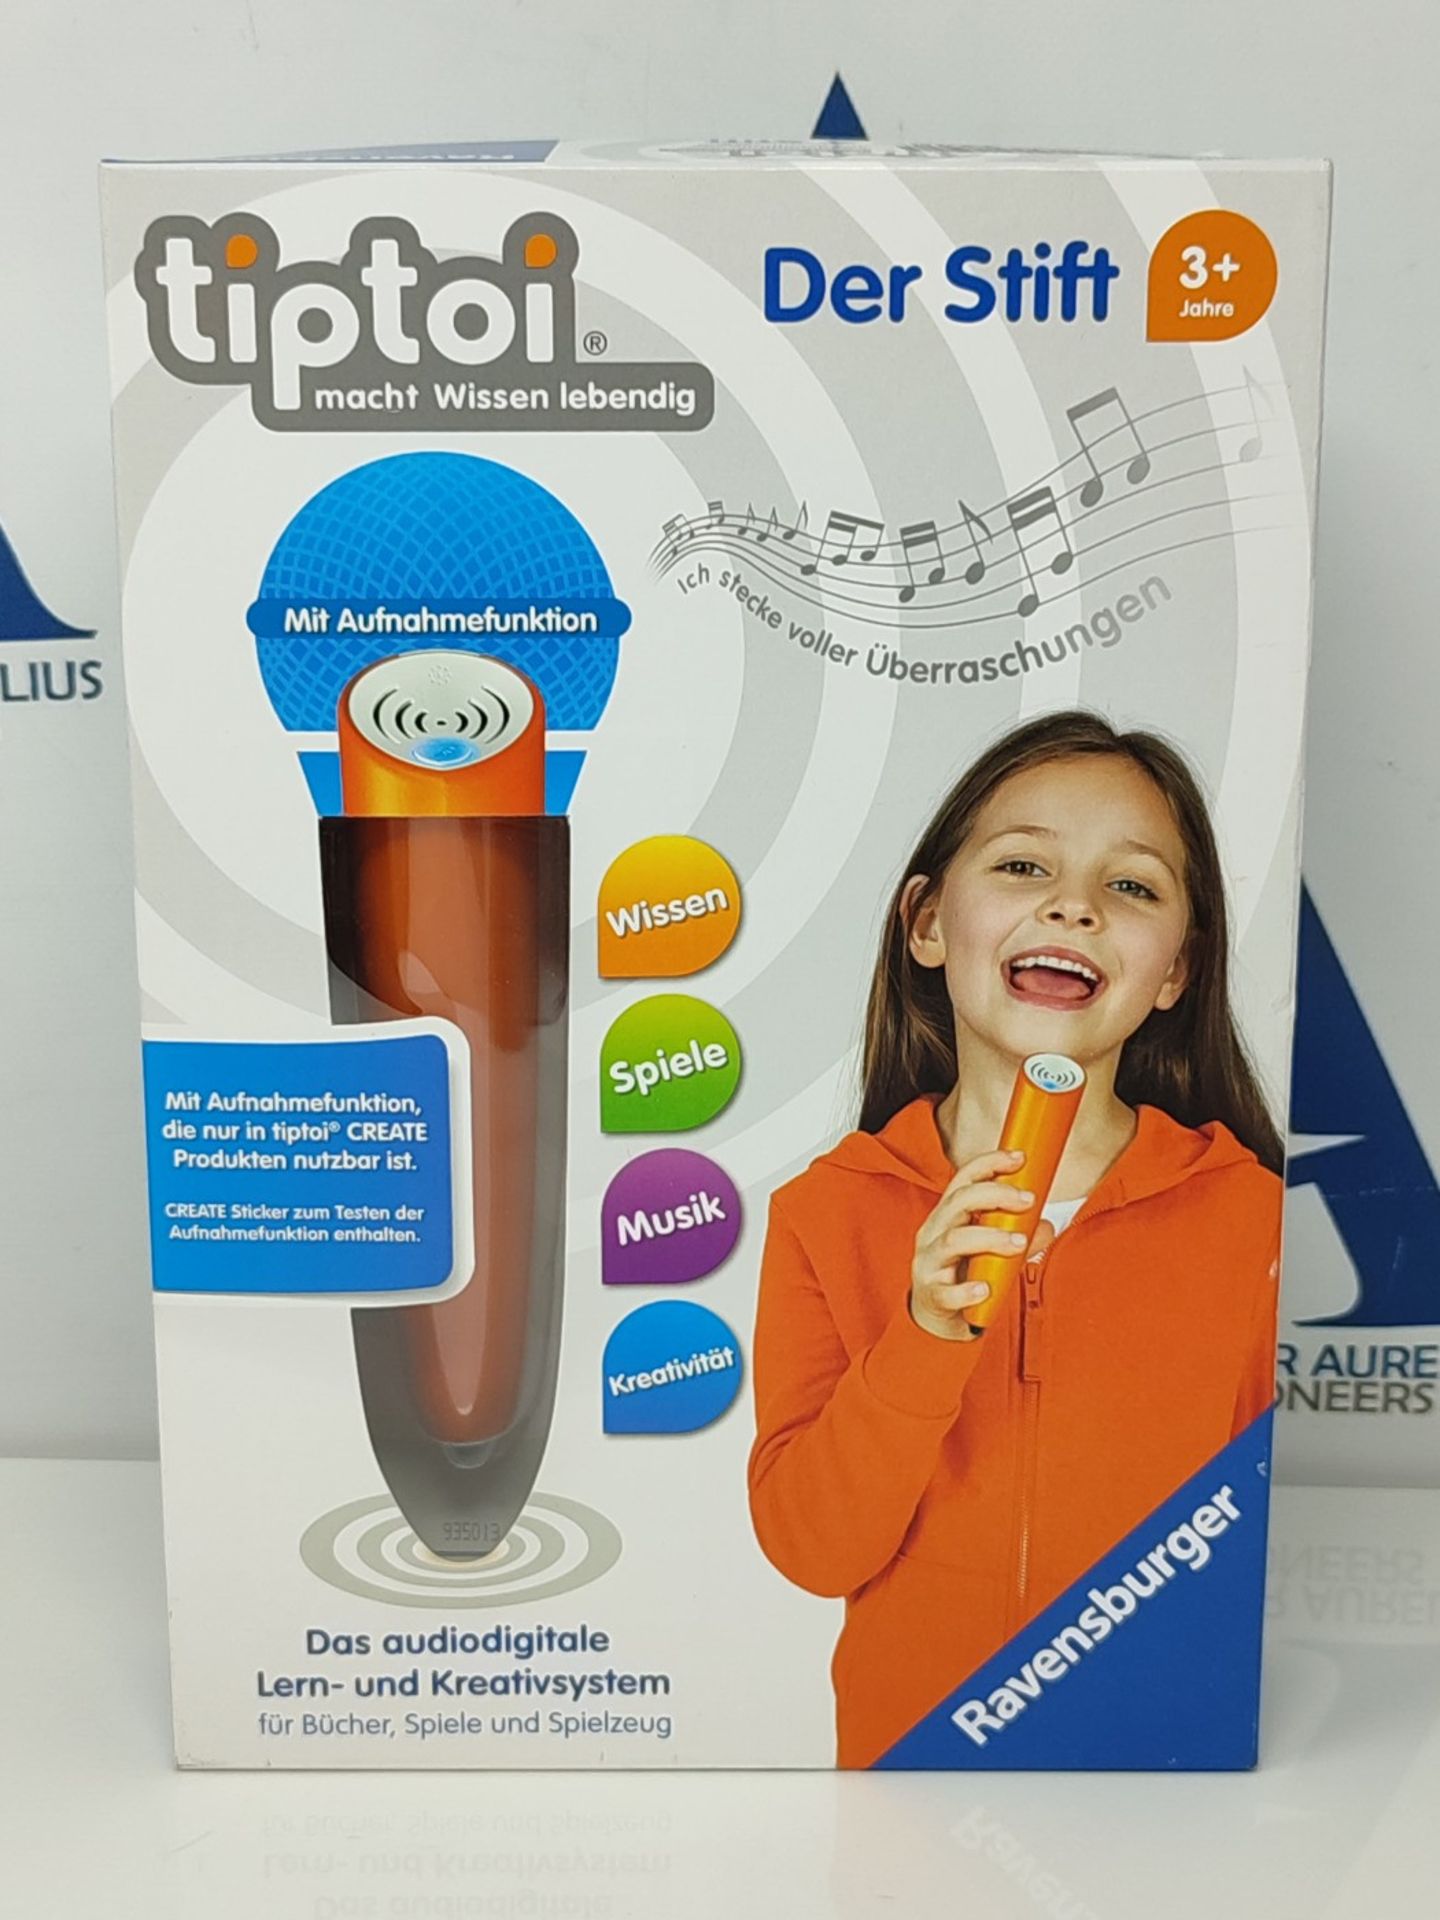 tiptoi® The pen: the audio-digital learning and creative system - Image 2 of 3